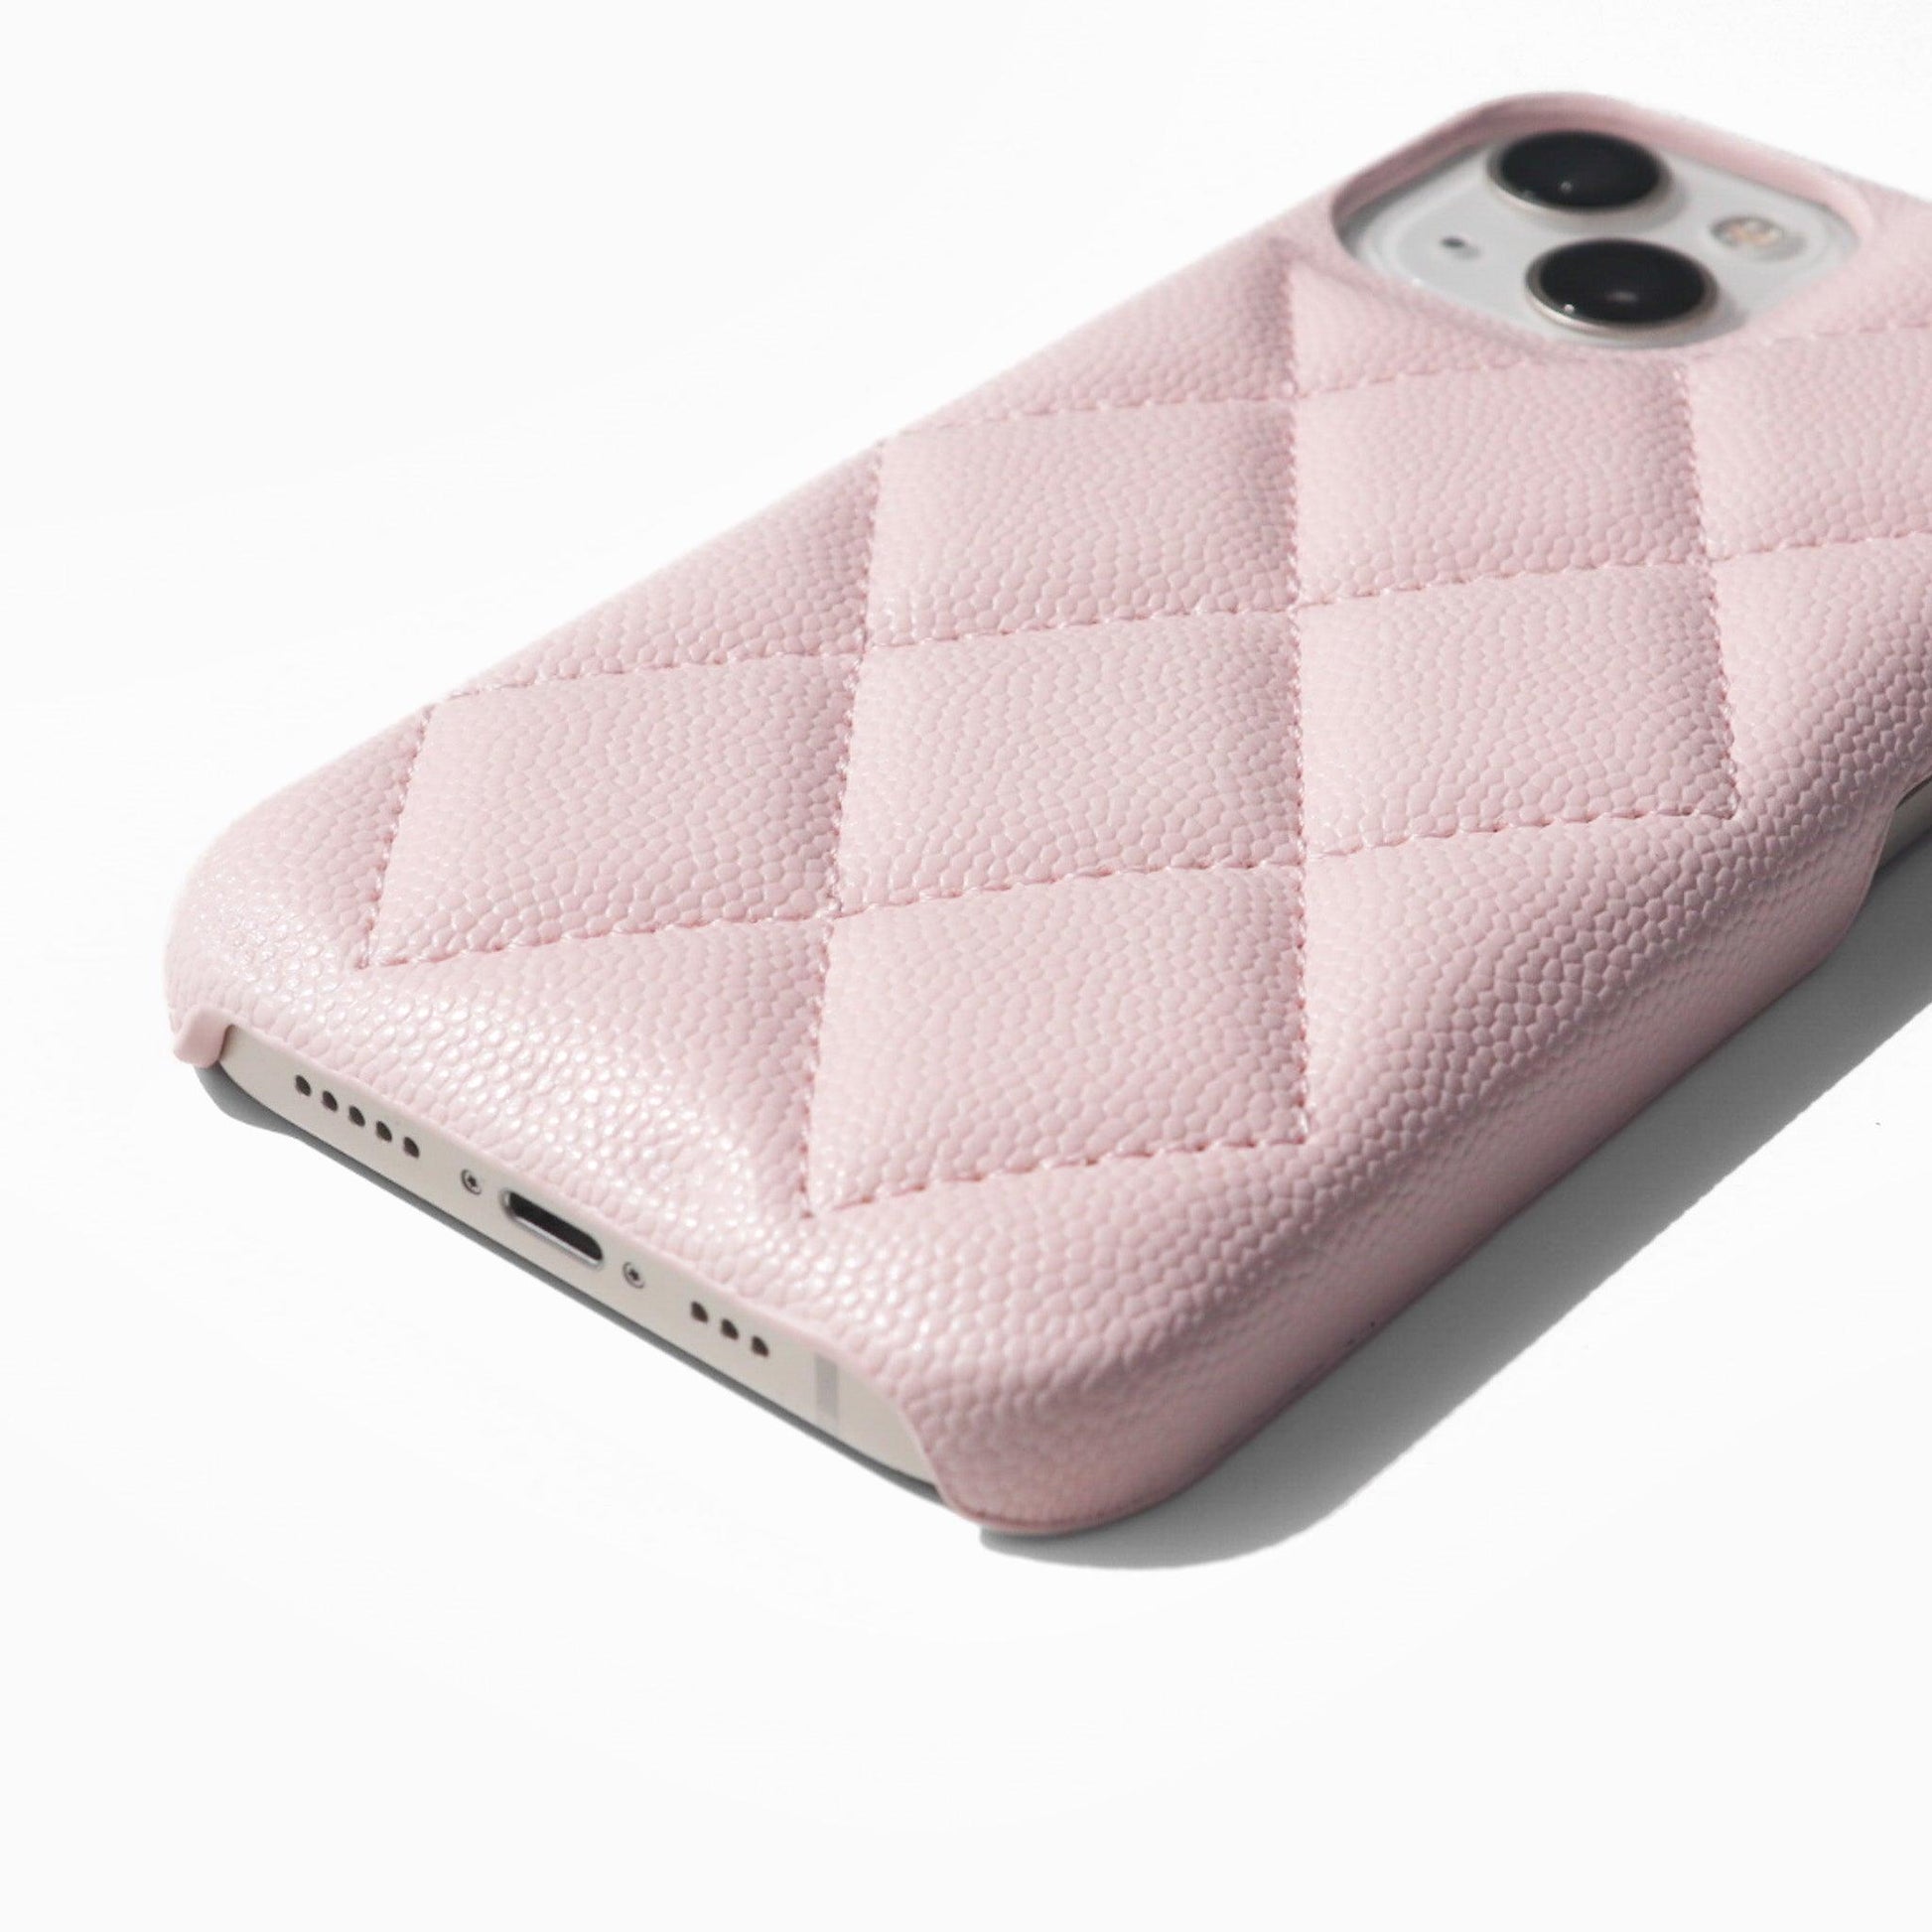 iPhone Quilt Case - Baby Pink